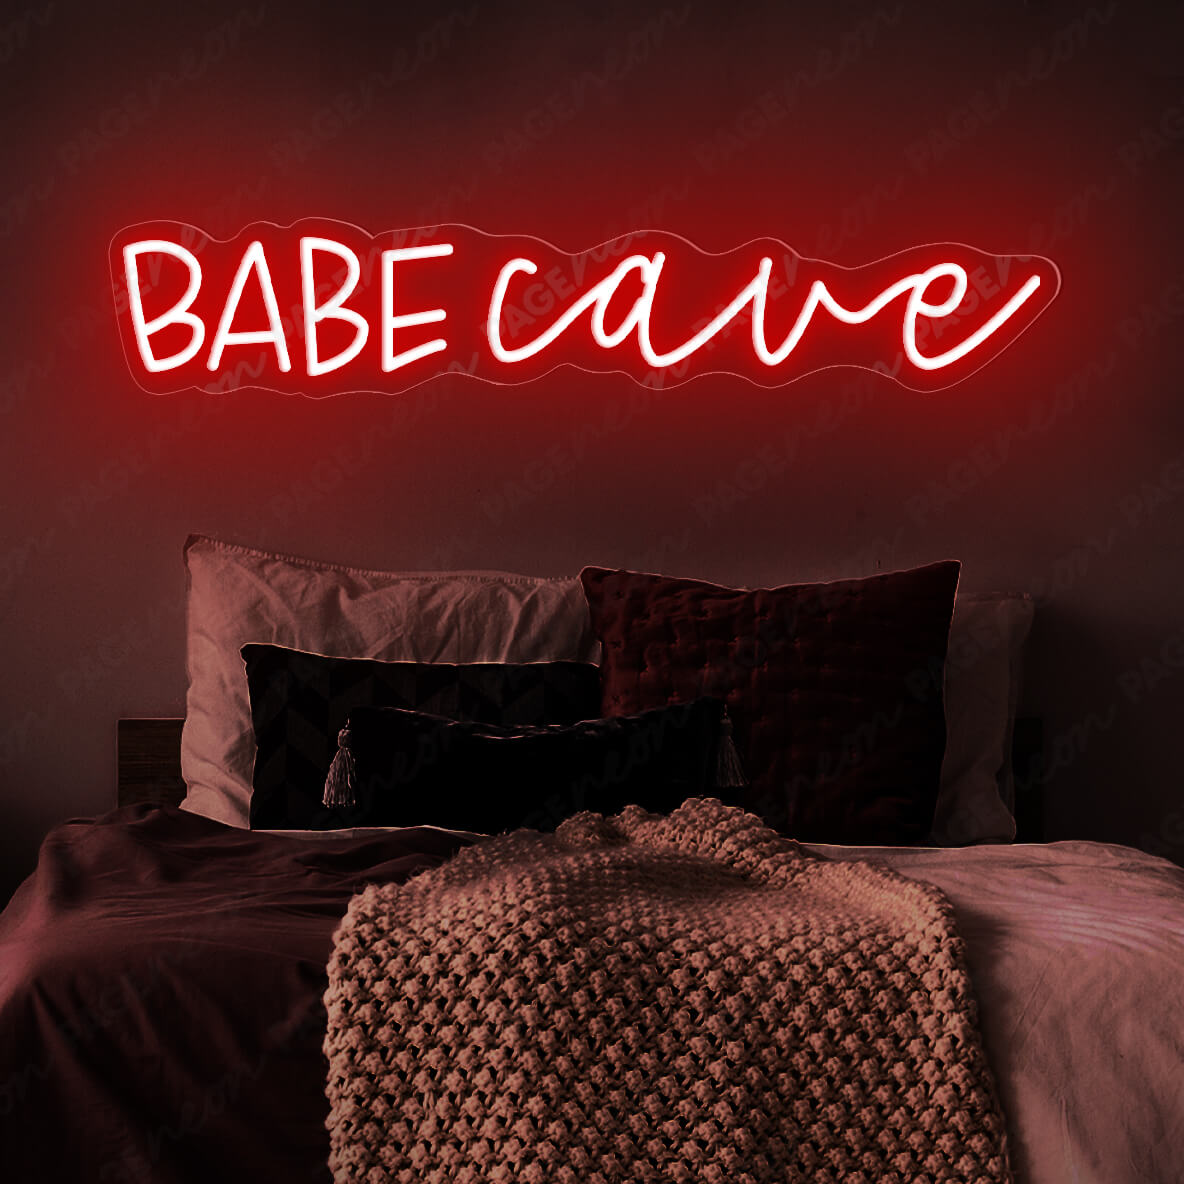 Babe Cave Neon Sign Led Light Red